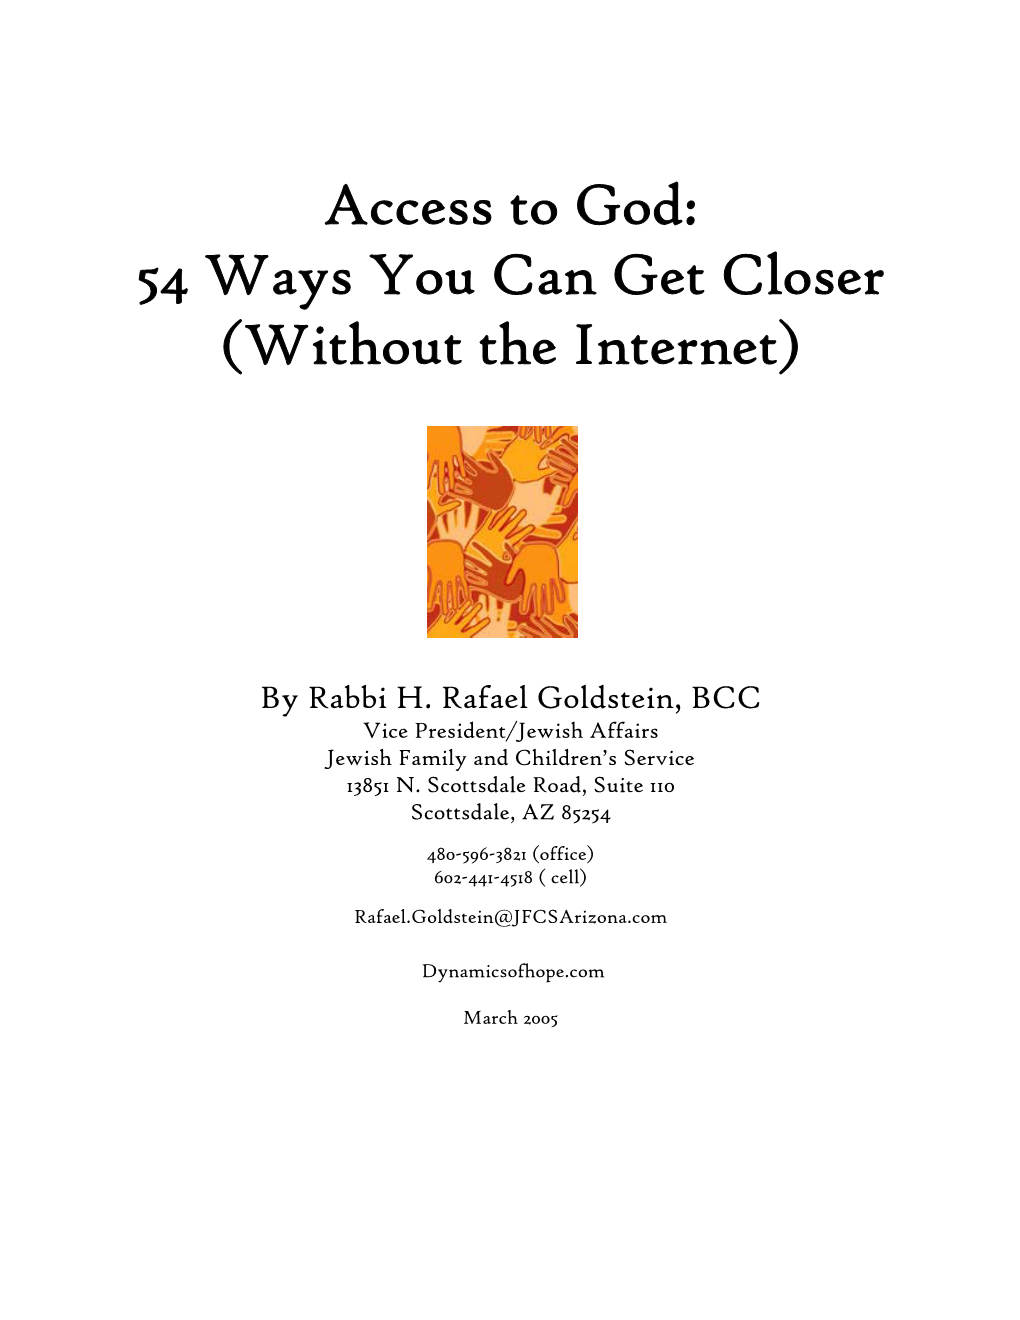 Access to God: 54 Ways You Can Get Closer (Without the Internet)